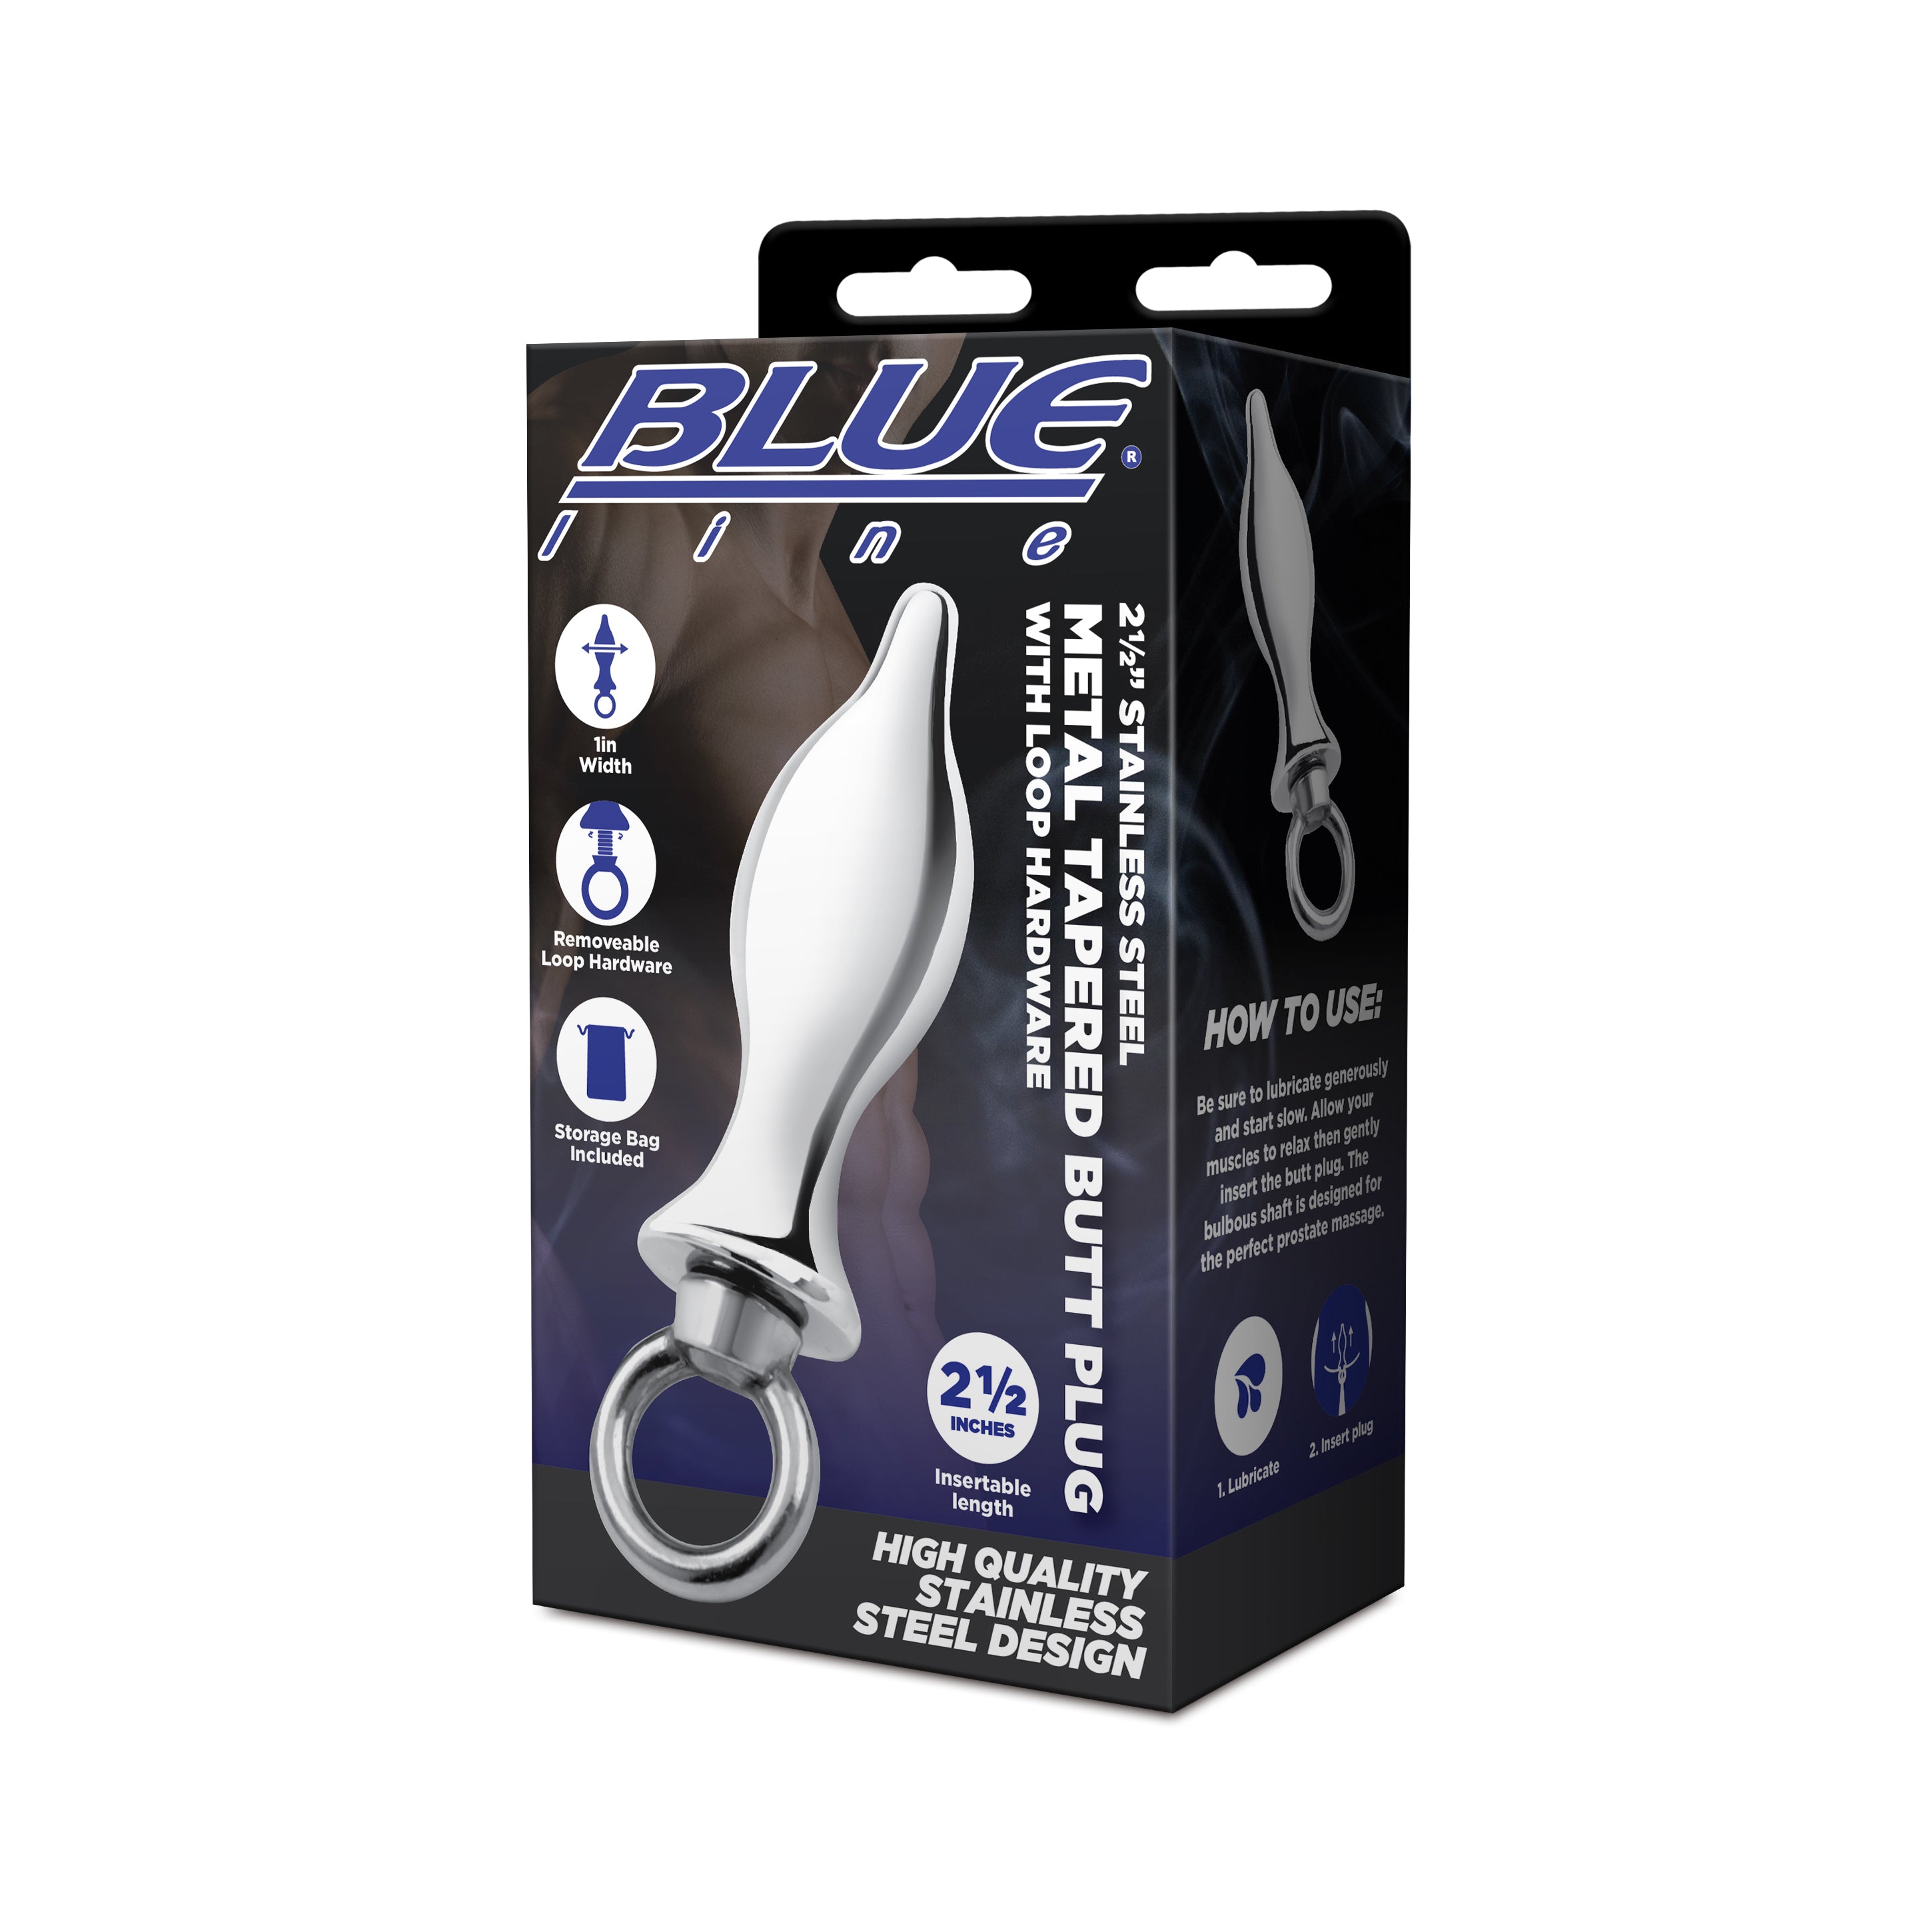 2.5" Stainless Steel Metal Tapered Butt Plug With Loop Hardware